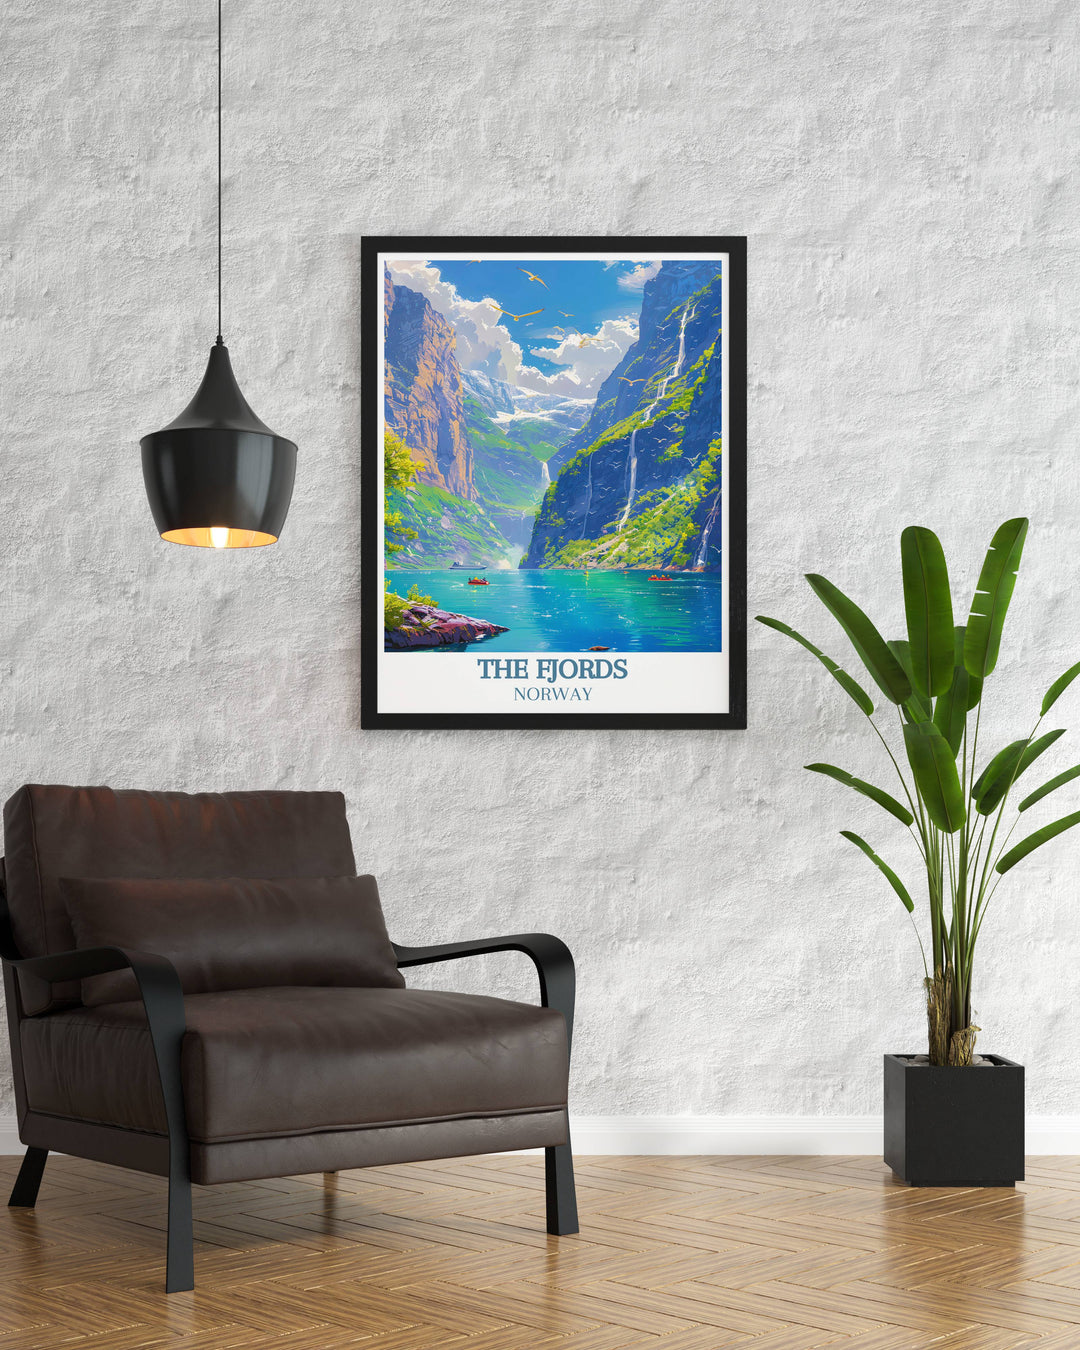 Norway Canvas Art featuring bold, dramatic scenes of the fjords and serene coastal views, showcasing the diverse and stunning beauty of Norways landscapes, perfect for any decor style.